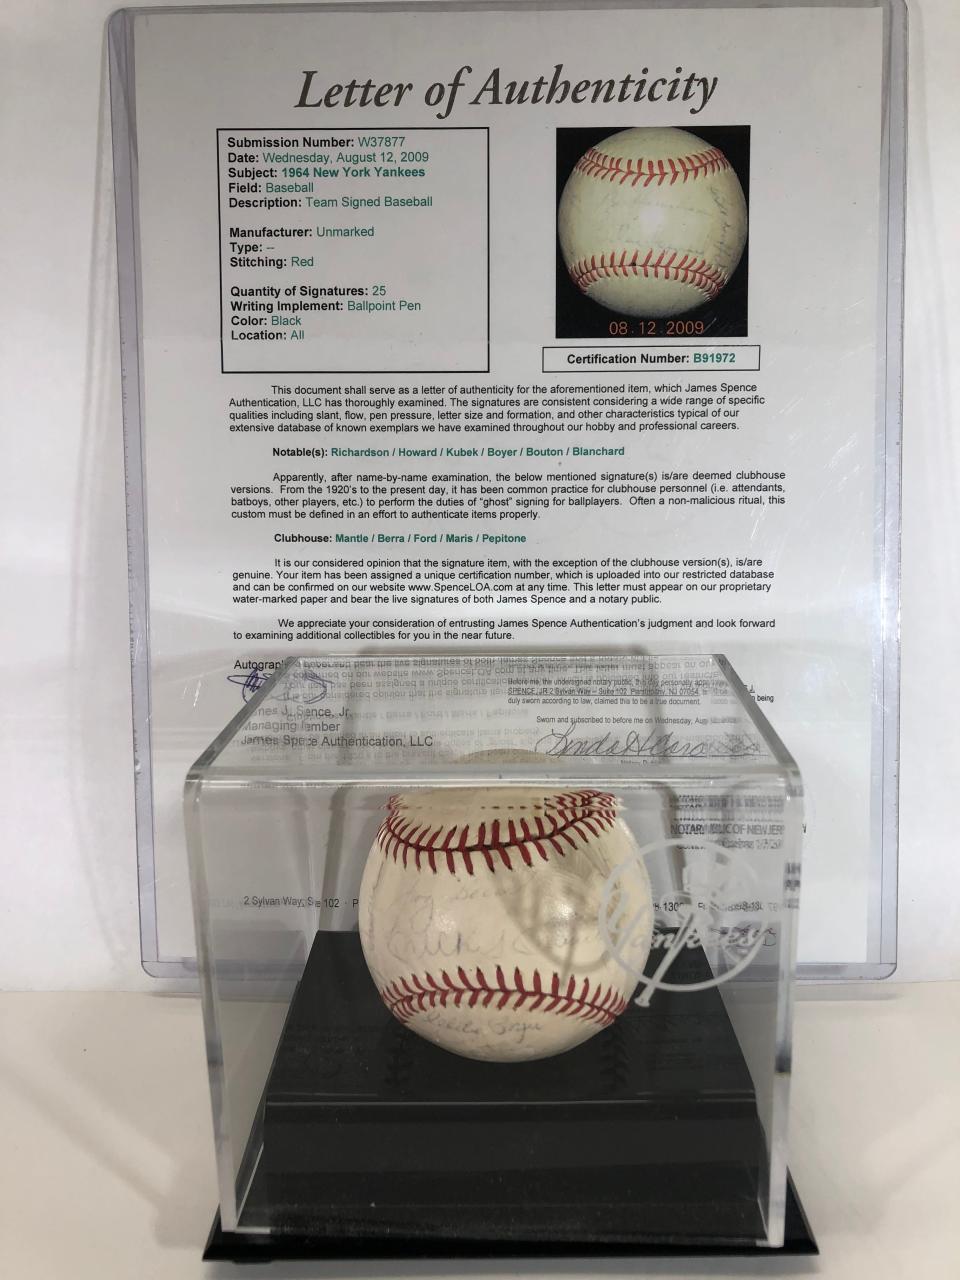 The letter of authenticity that accompanies this signed baseball adds substantially to it value.